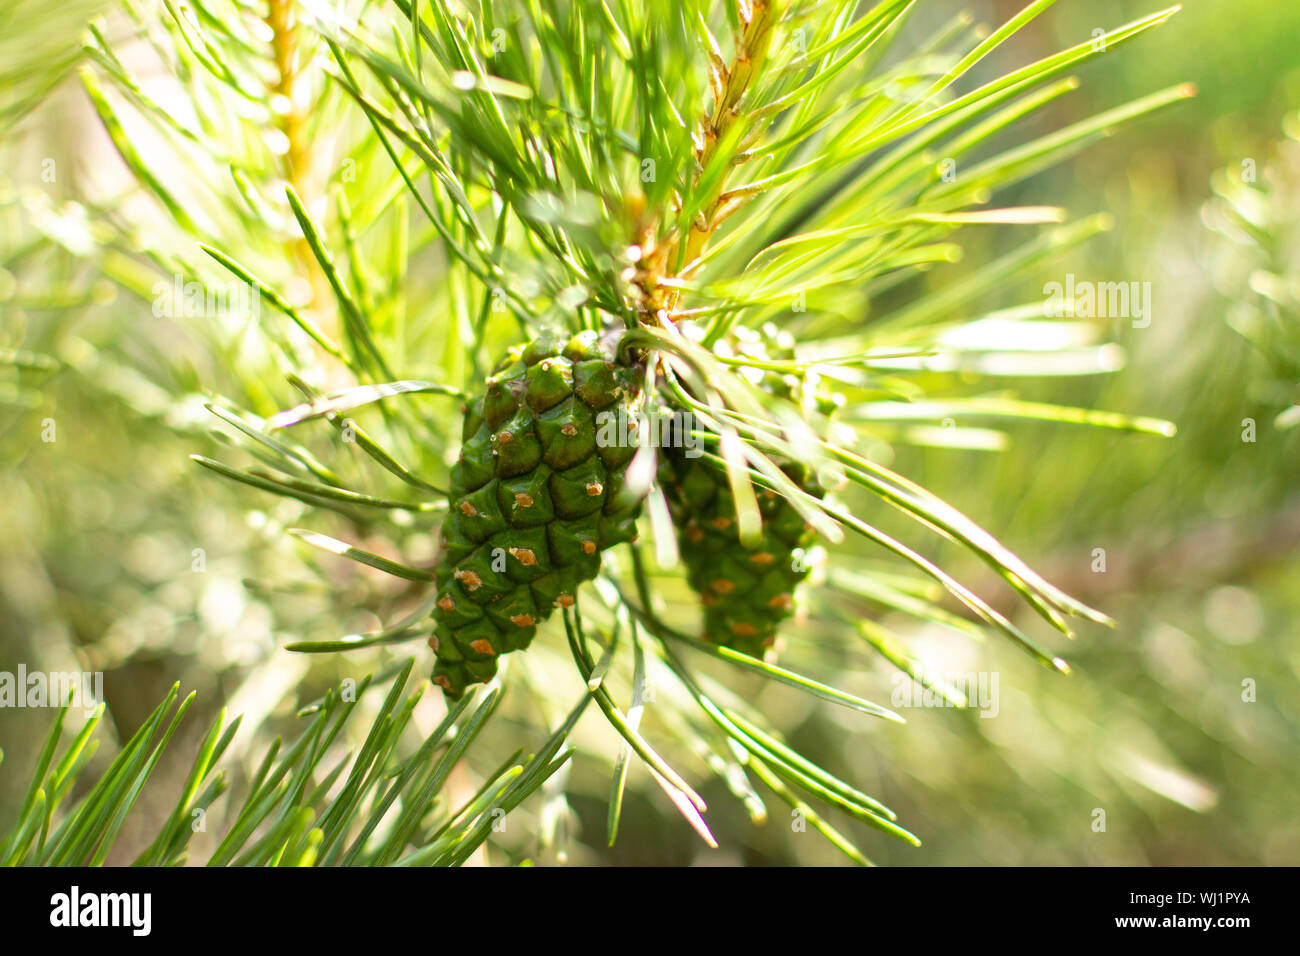 Young pine cones on a green tree branch. Coniferous evergreen pine with fruits, pine shoots, green bump close-up horizontal Stock Photo